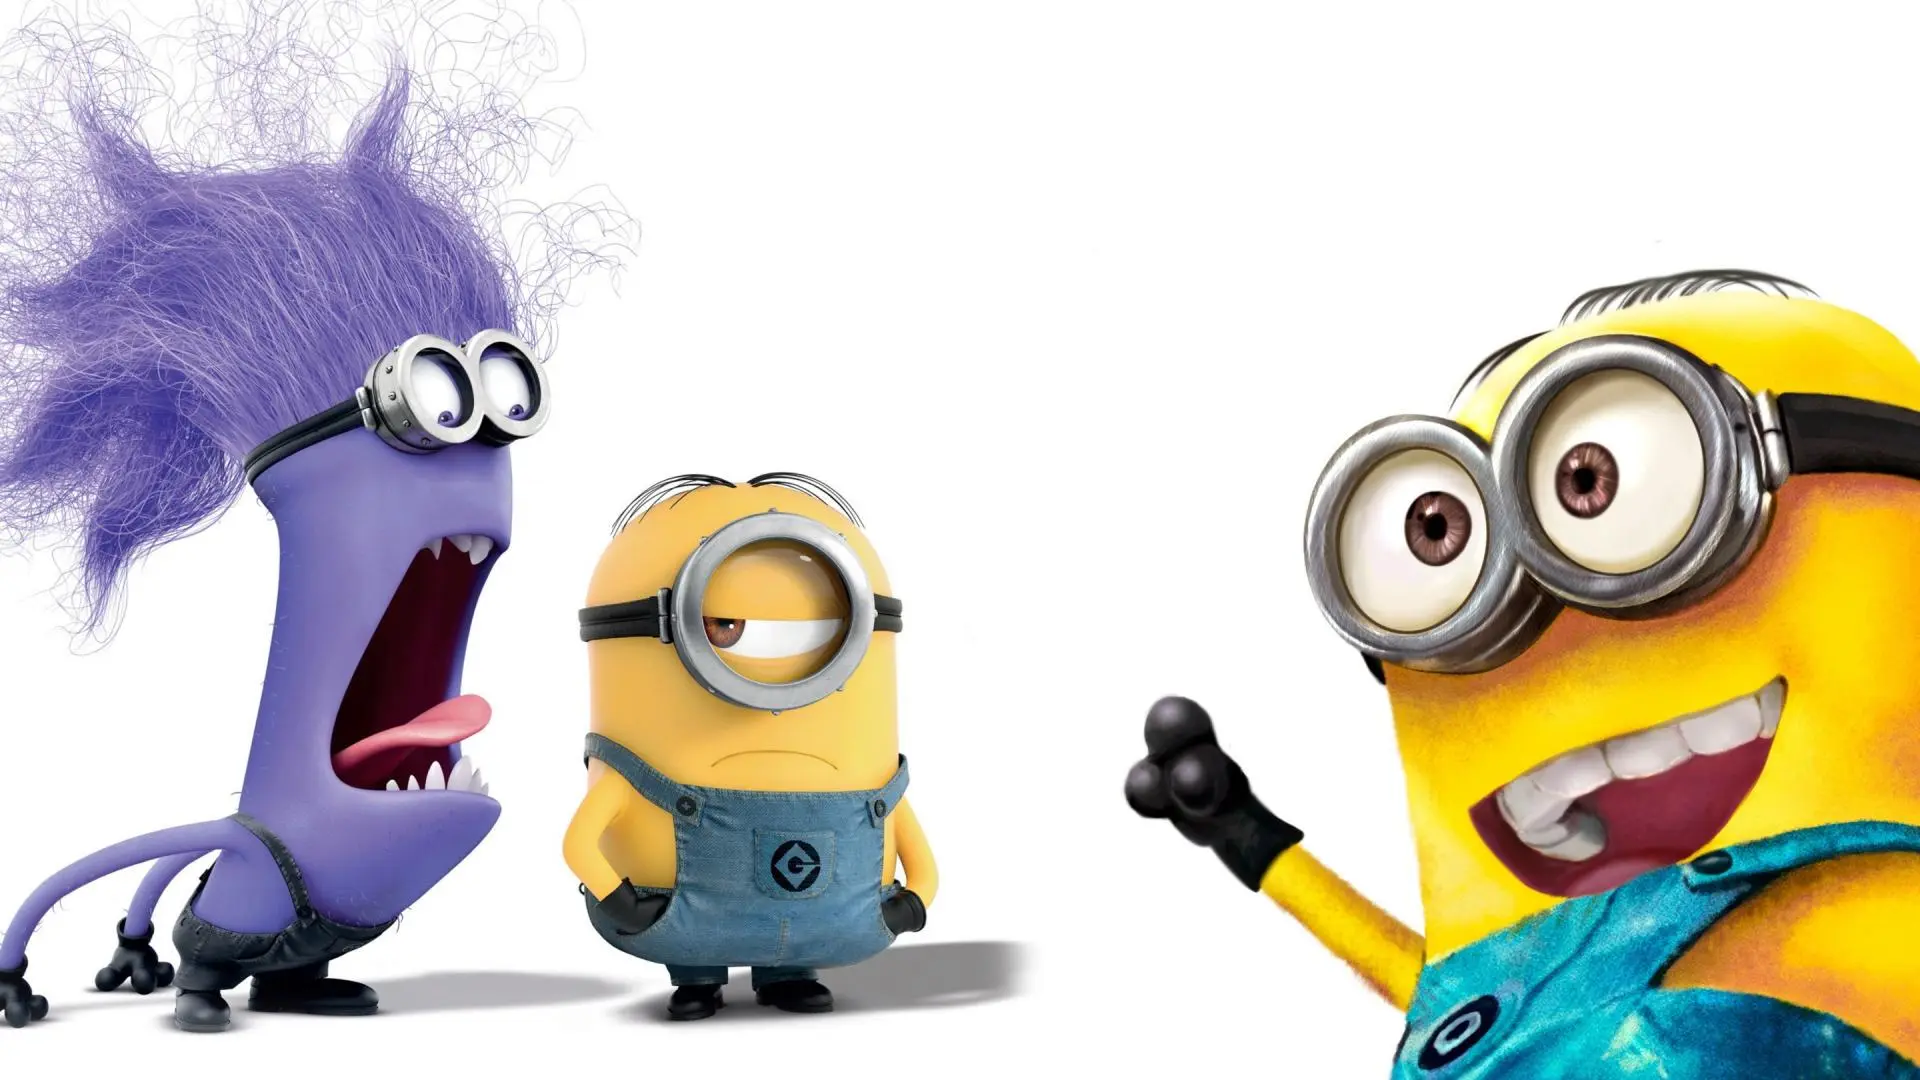 Movie Minions wallpaper 1 | Background Image